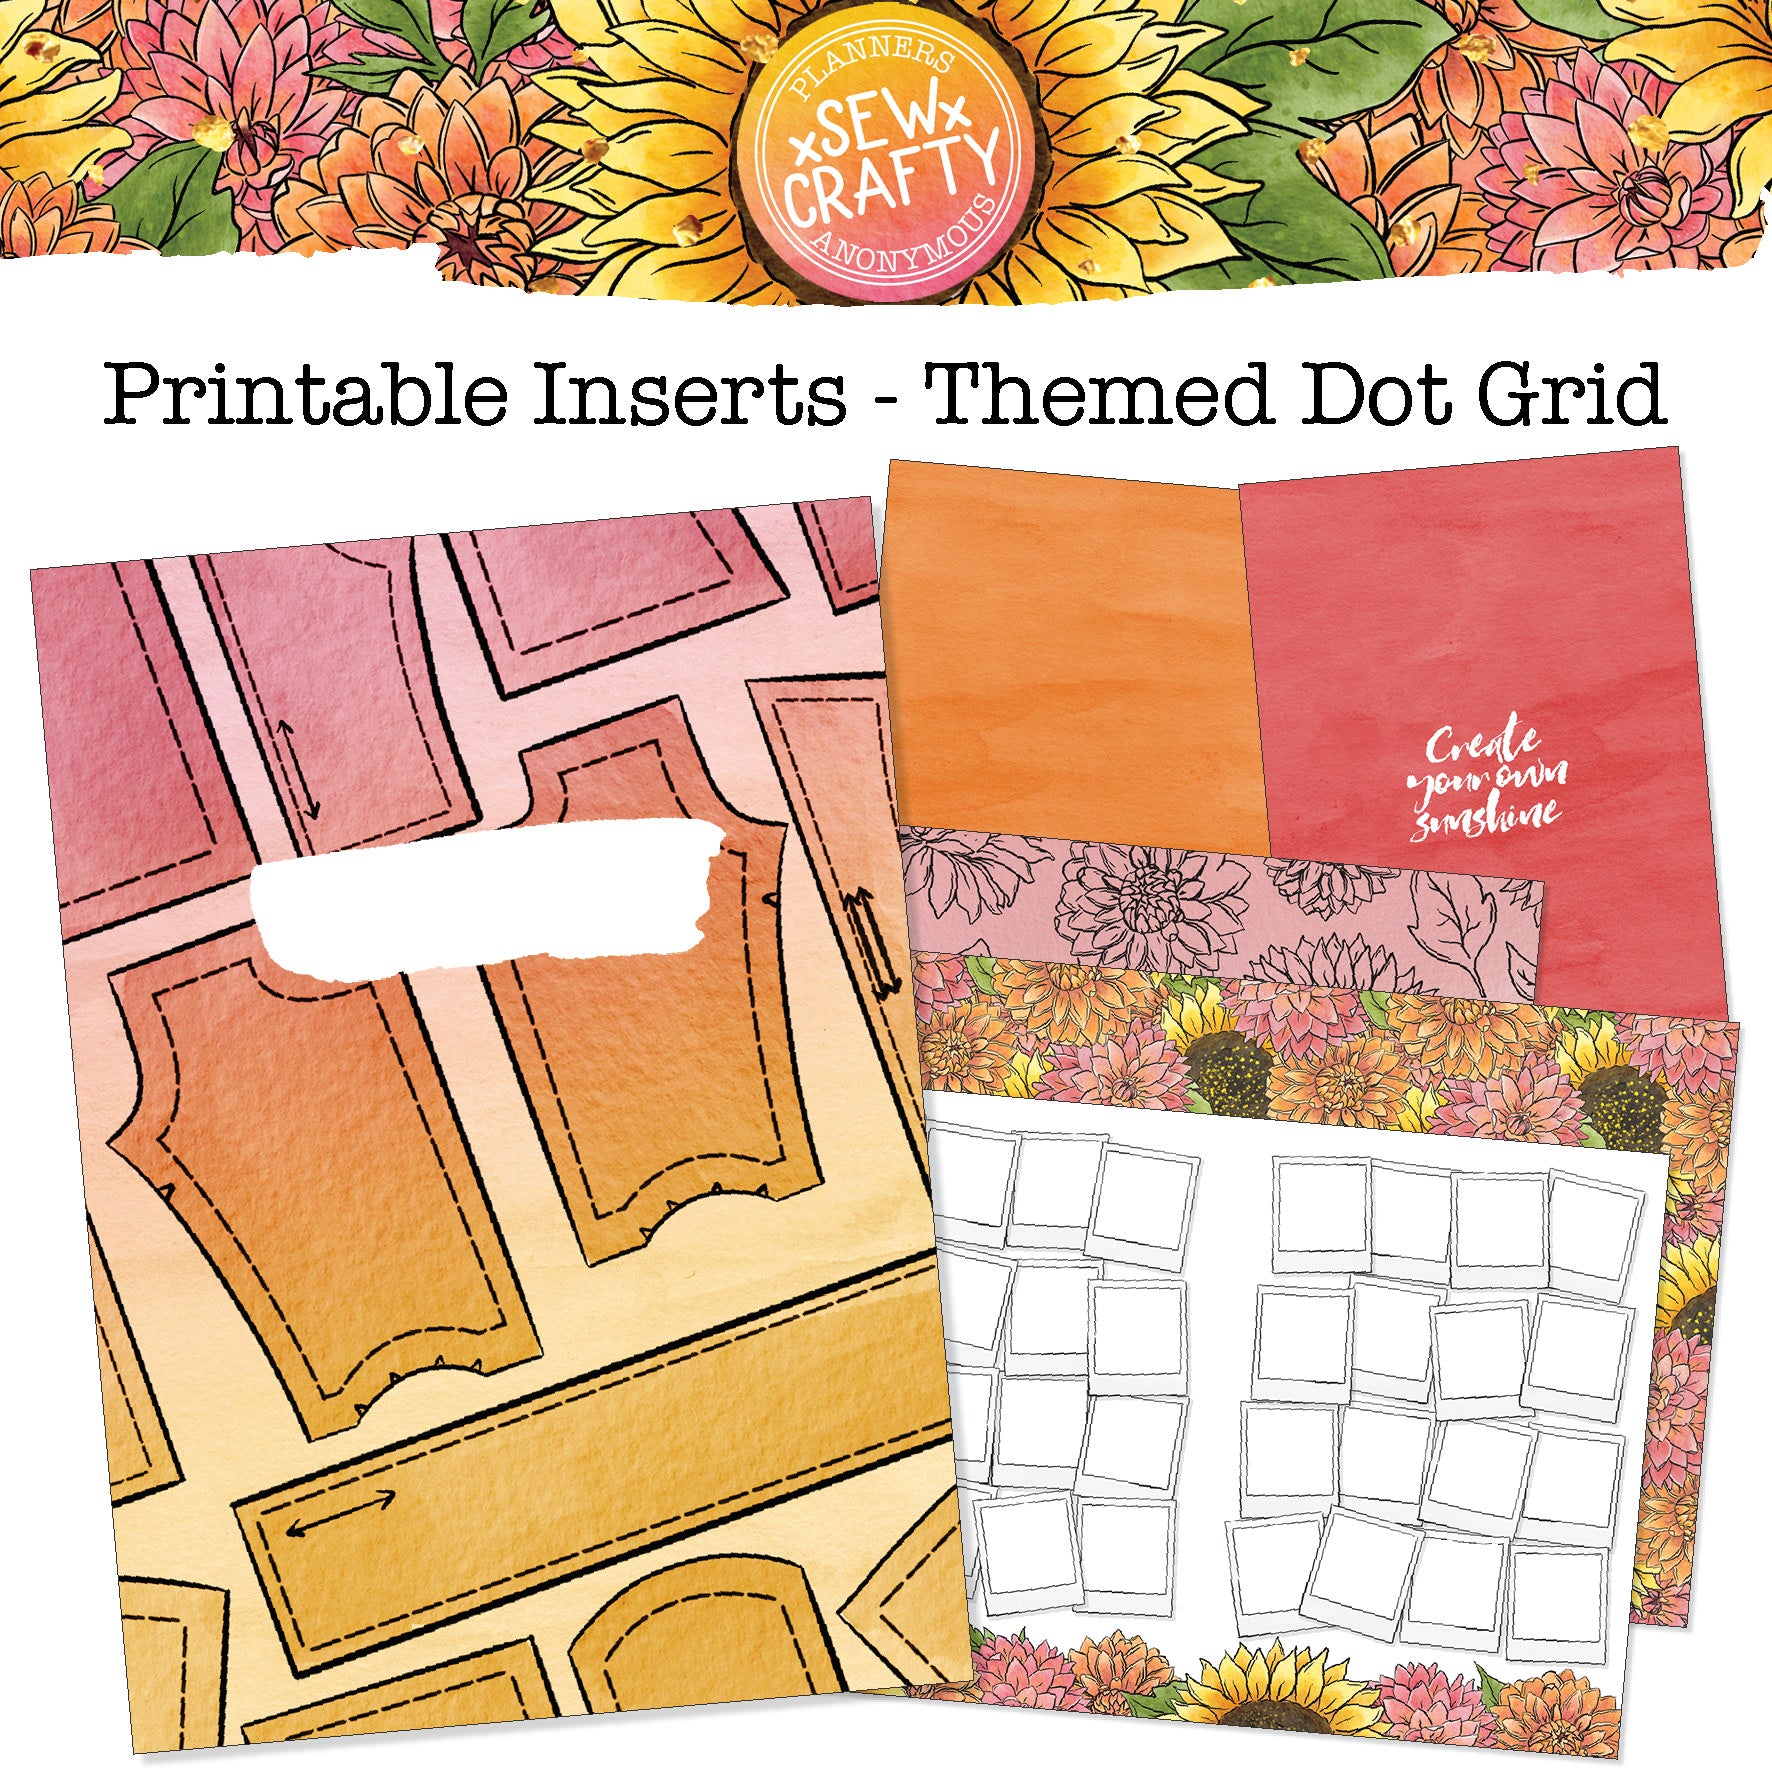 Sew Crafty - Printable Inserts - Themed Dot Grid